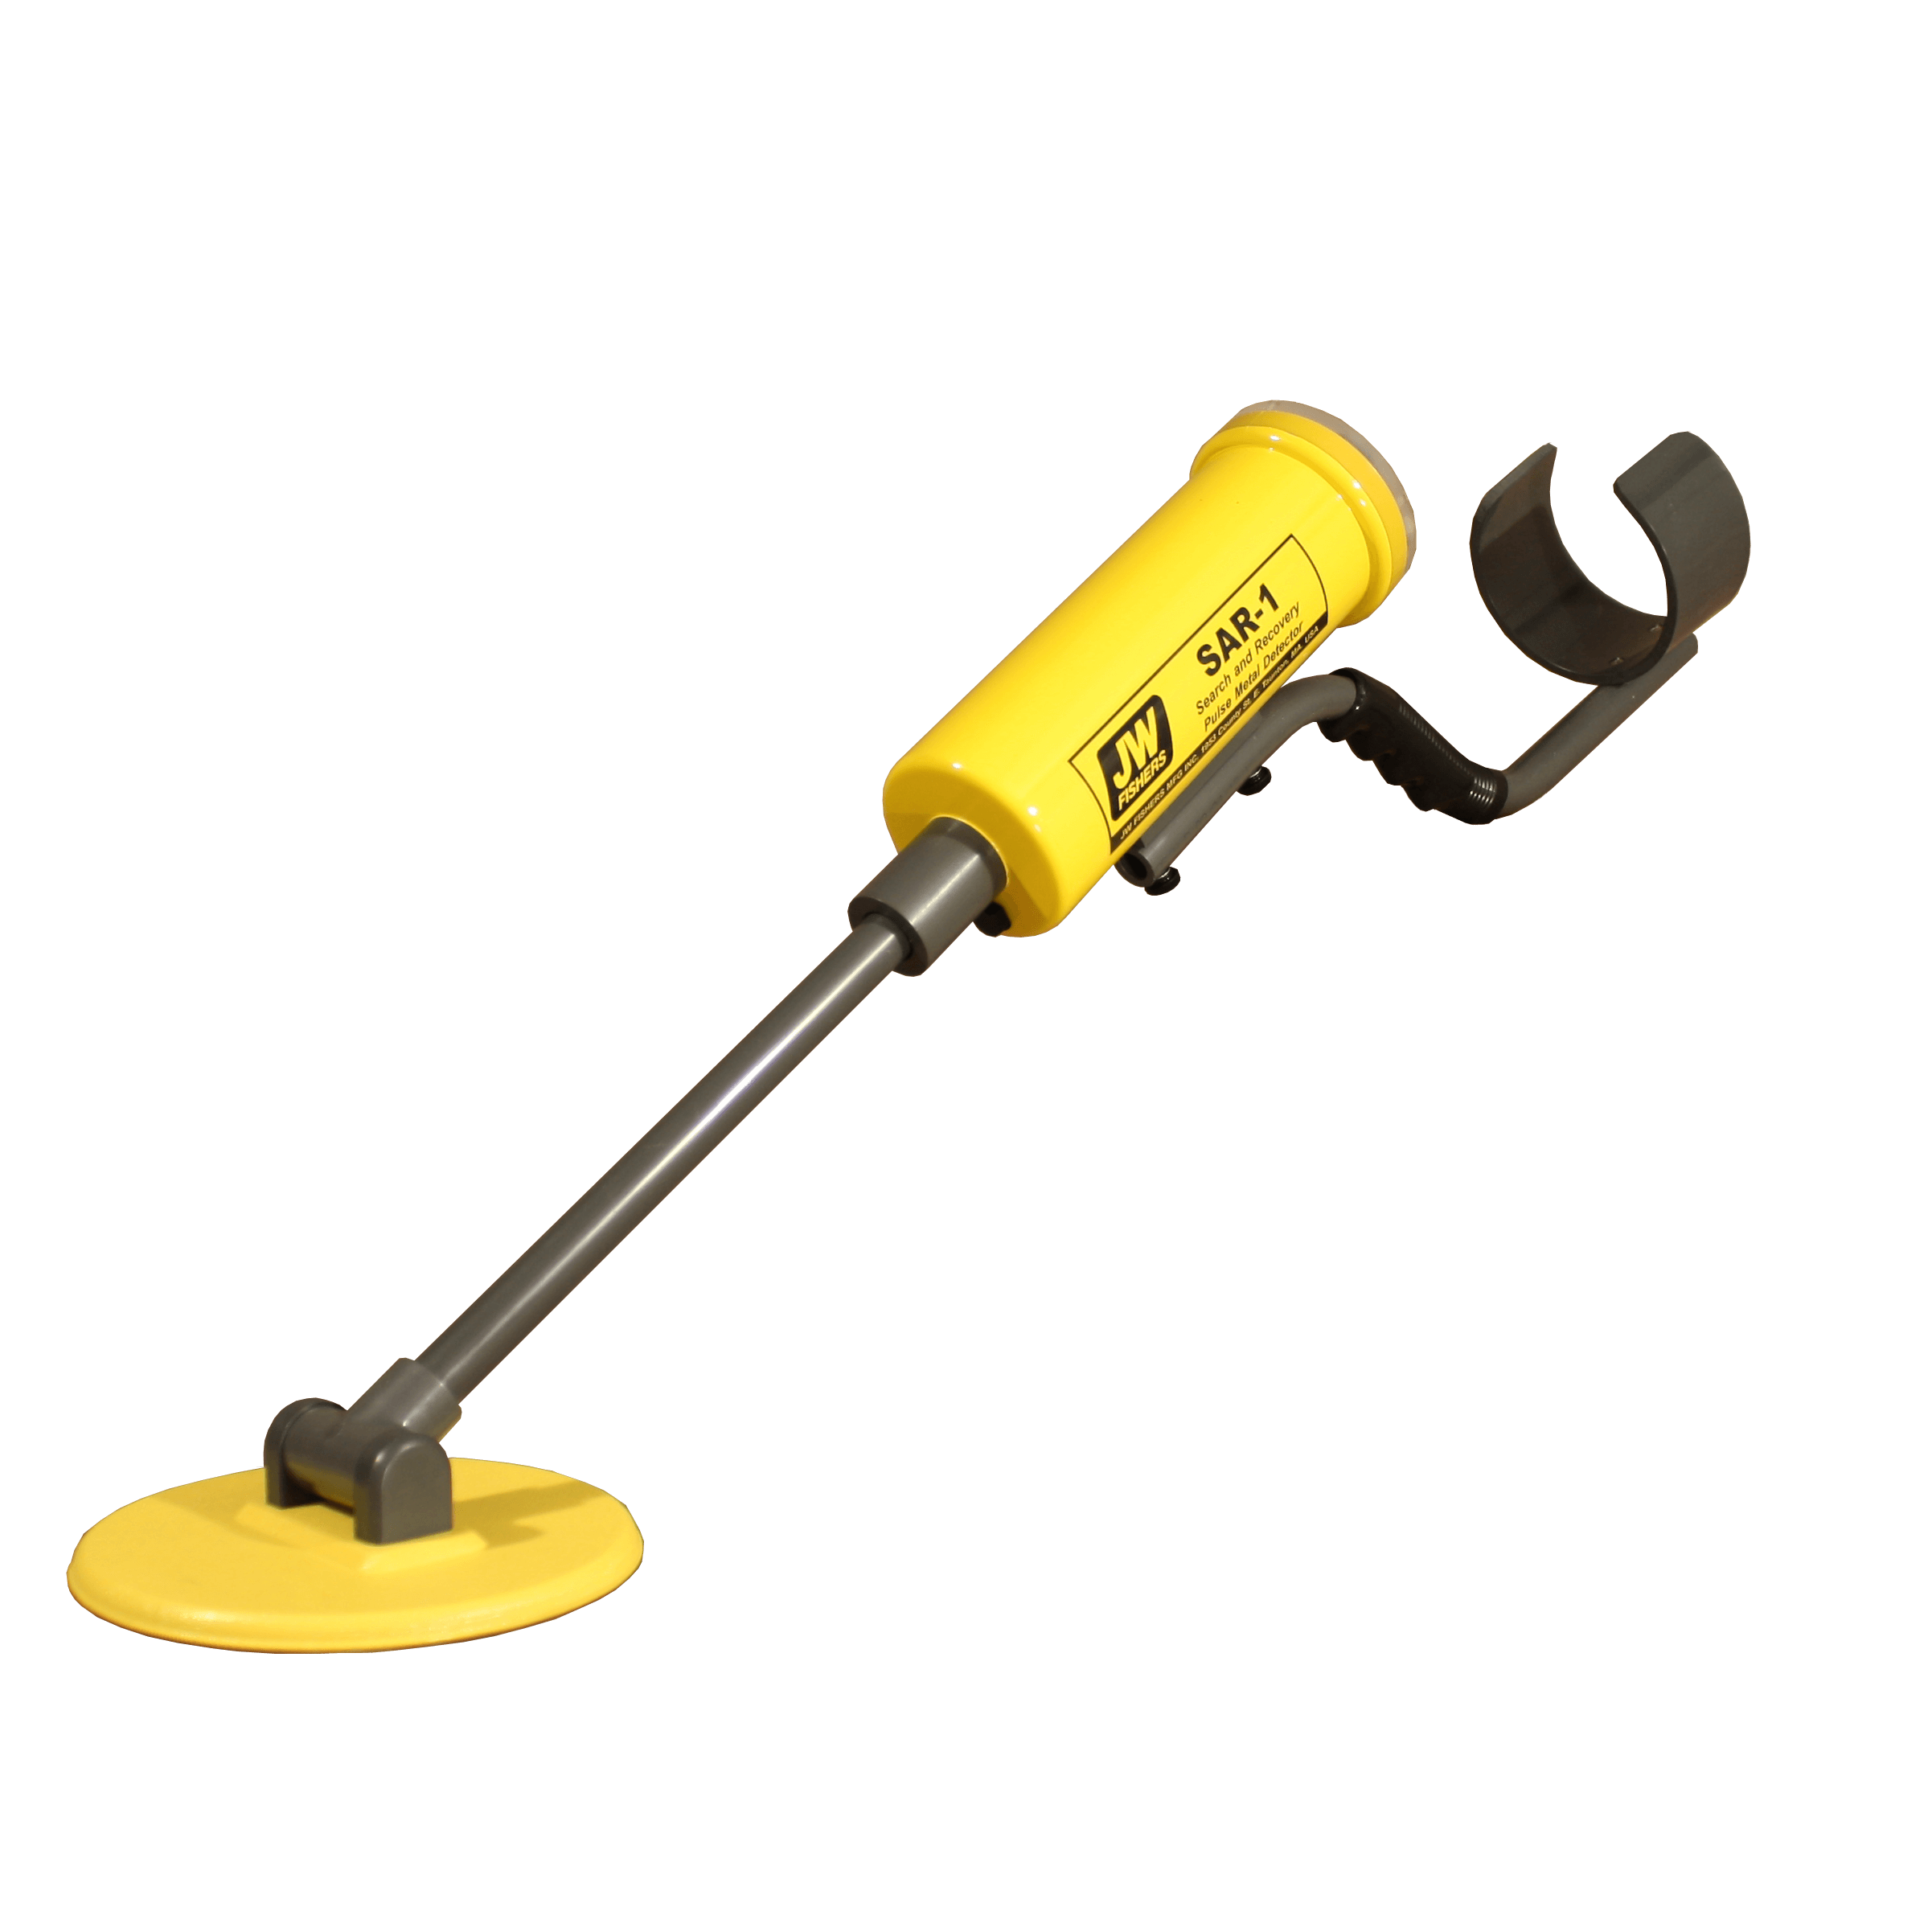 JW Fishers Metal Detector JW Fishers SAR-1 Search and Recovery Underwater Metal Detector with 8" Coil